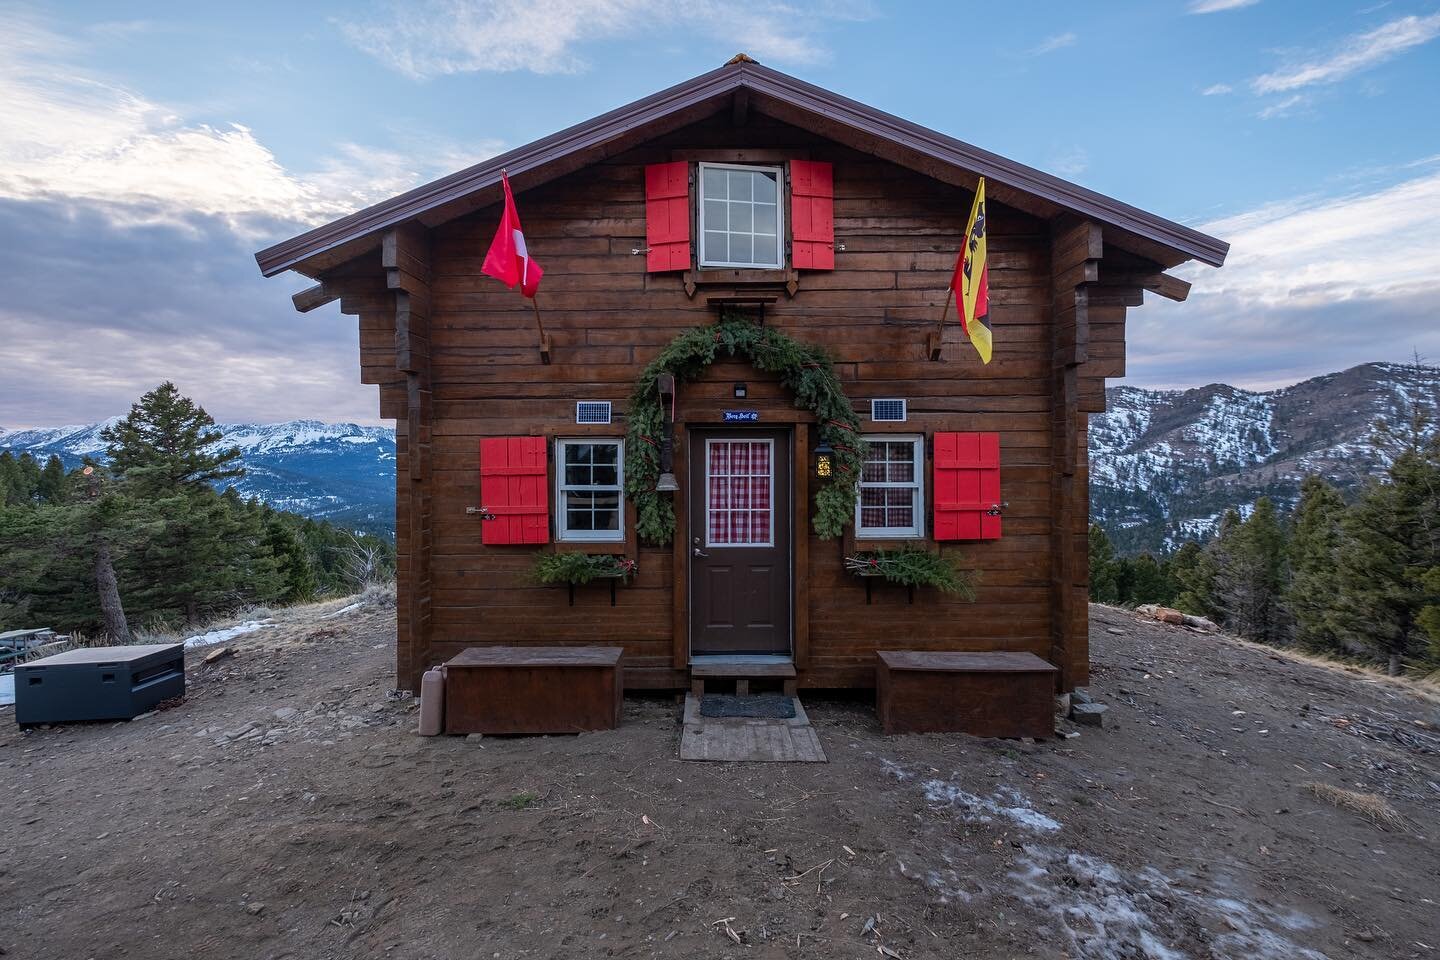 Such a cozy home from a couple winters ago: the Swiss Chalet, a custom log cabin in the mountains of Montana built in the style of, you guessed it&hellip;a Swiss chalet. I claim the reading nook by the wood stove! Another unique listing by @yellowsto